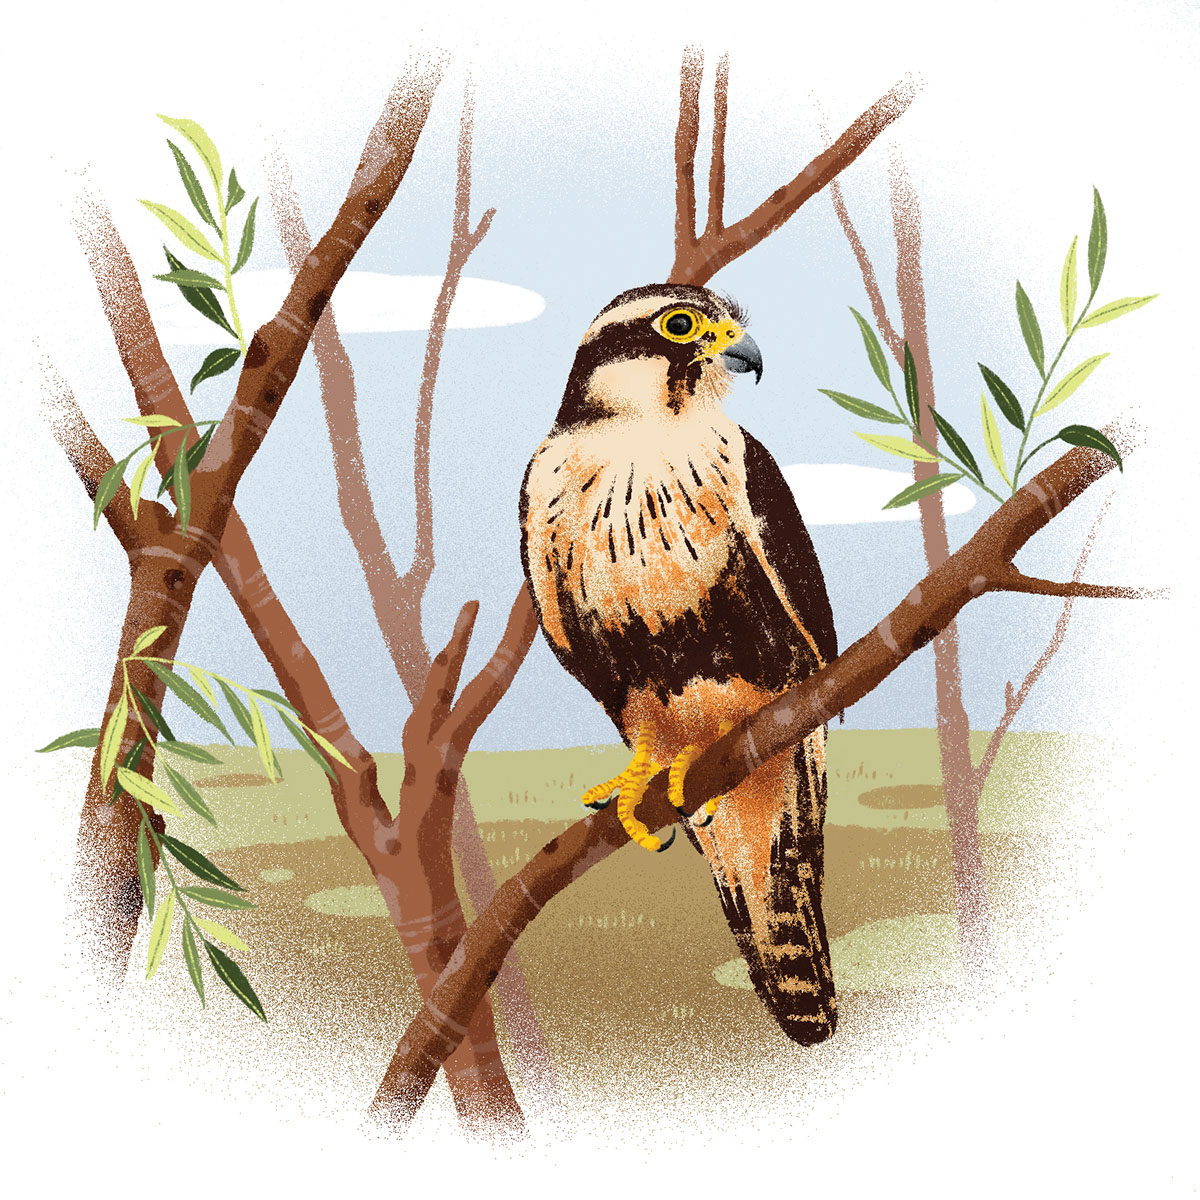 An illustration of a bird with dark brown wings, a white tuft, and small head with a beak sitting on a wooden branch